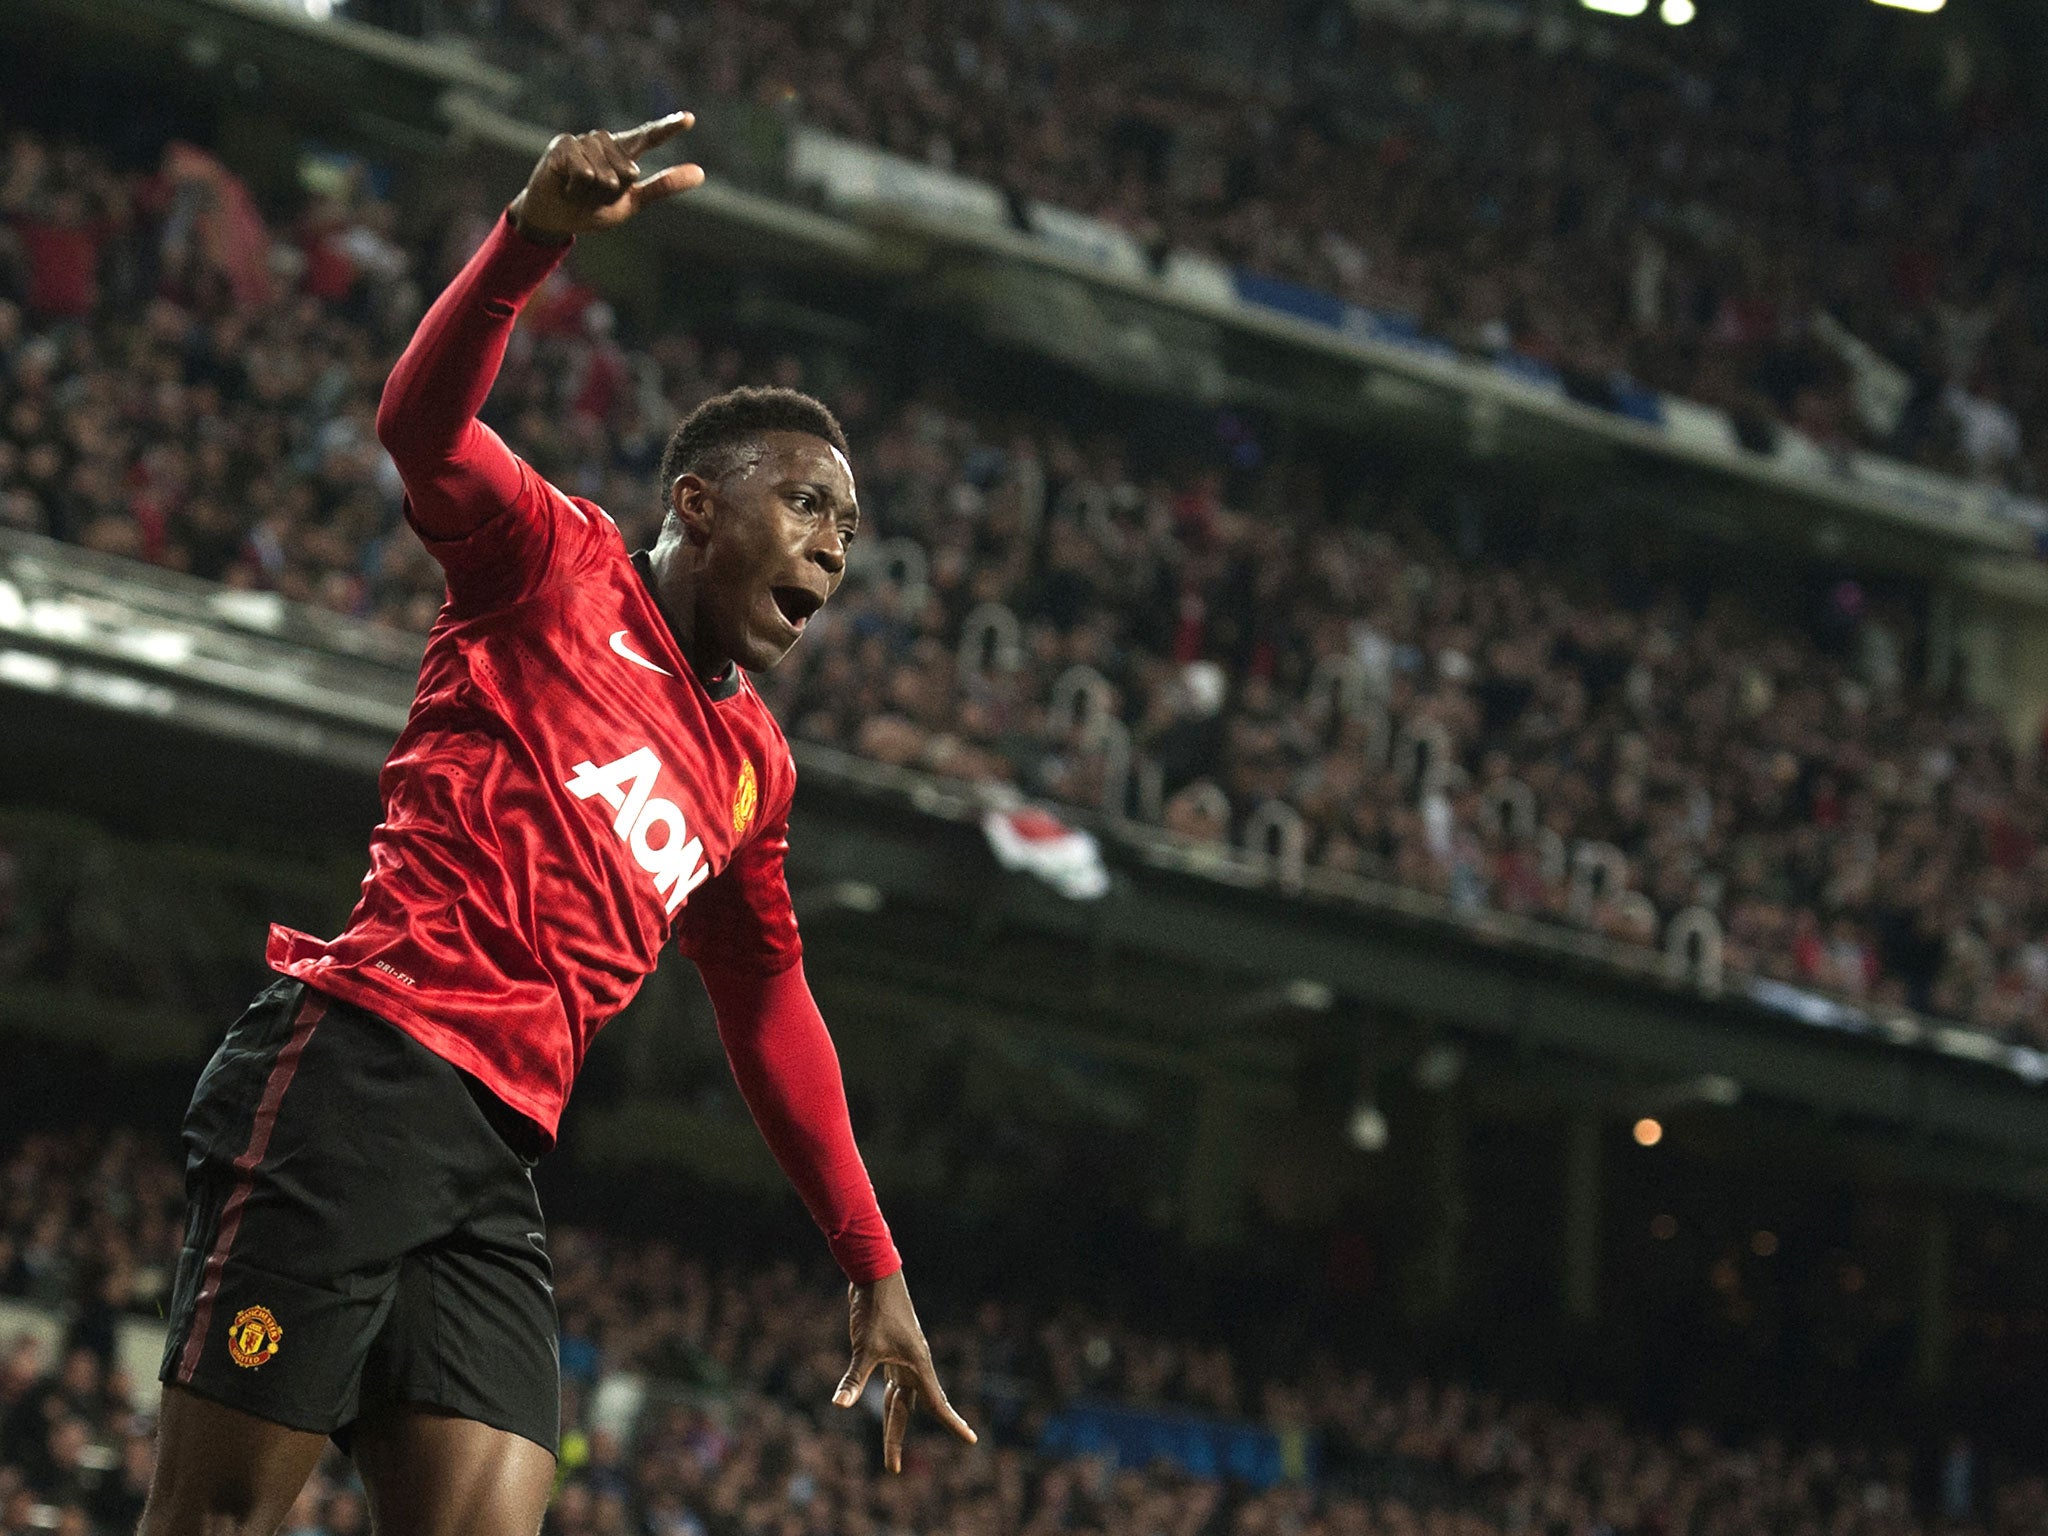 Danny Welbeck powered home the header that set United up for an encouraging 1-1 draw